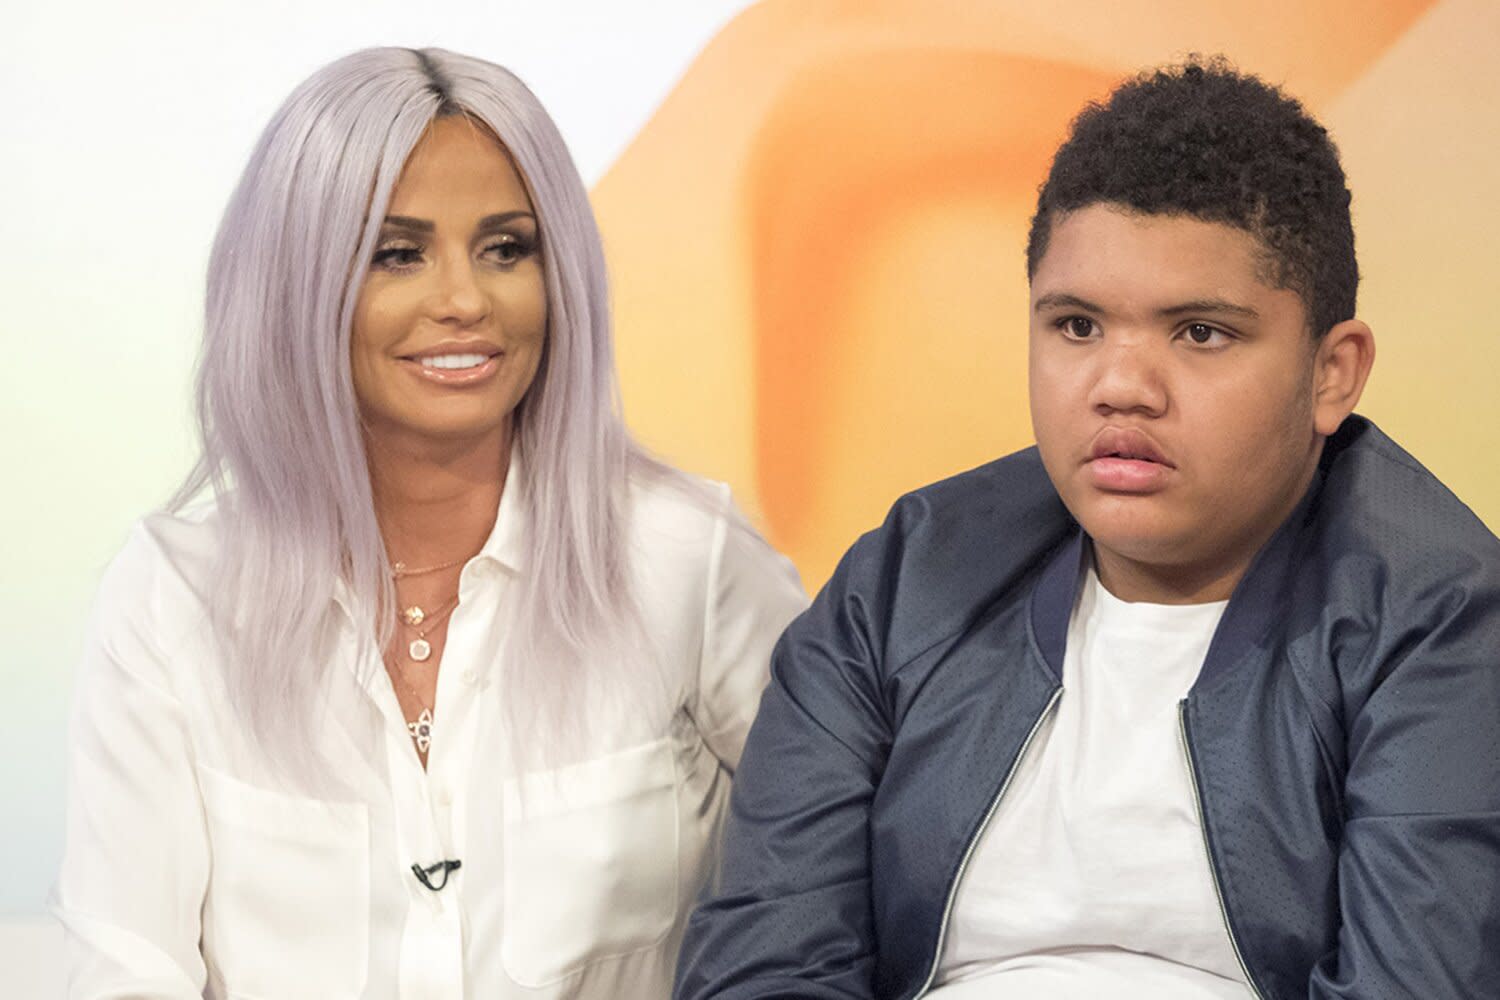 Katie Price says she decided to put 18-year-old son Harvey in a full-time nursing home